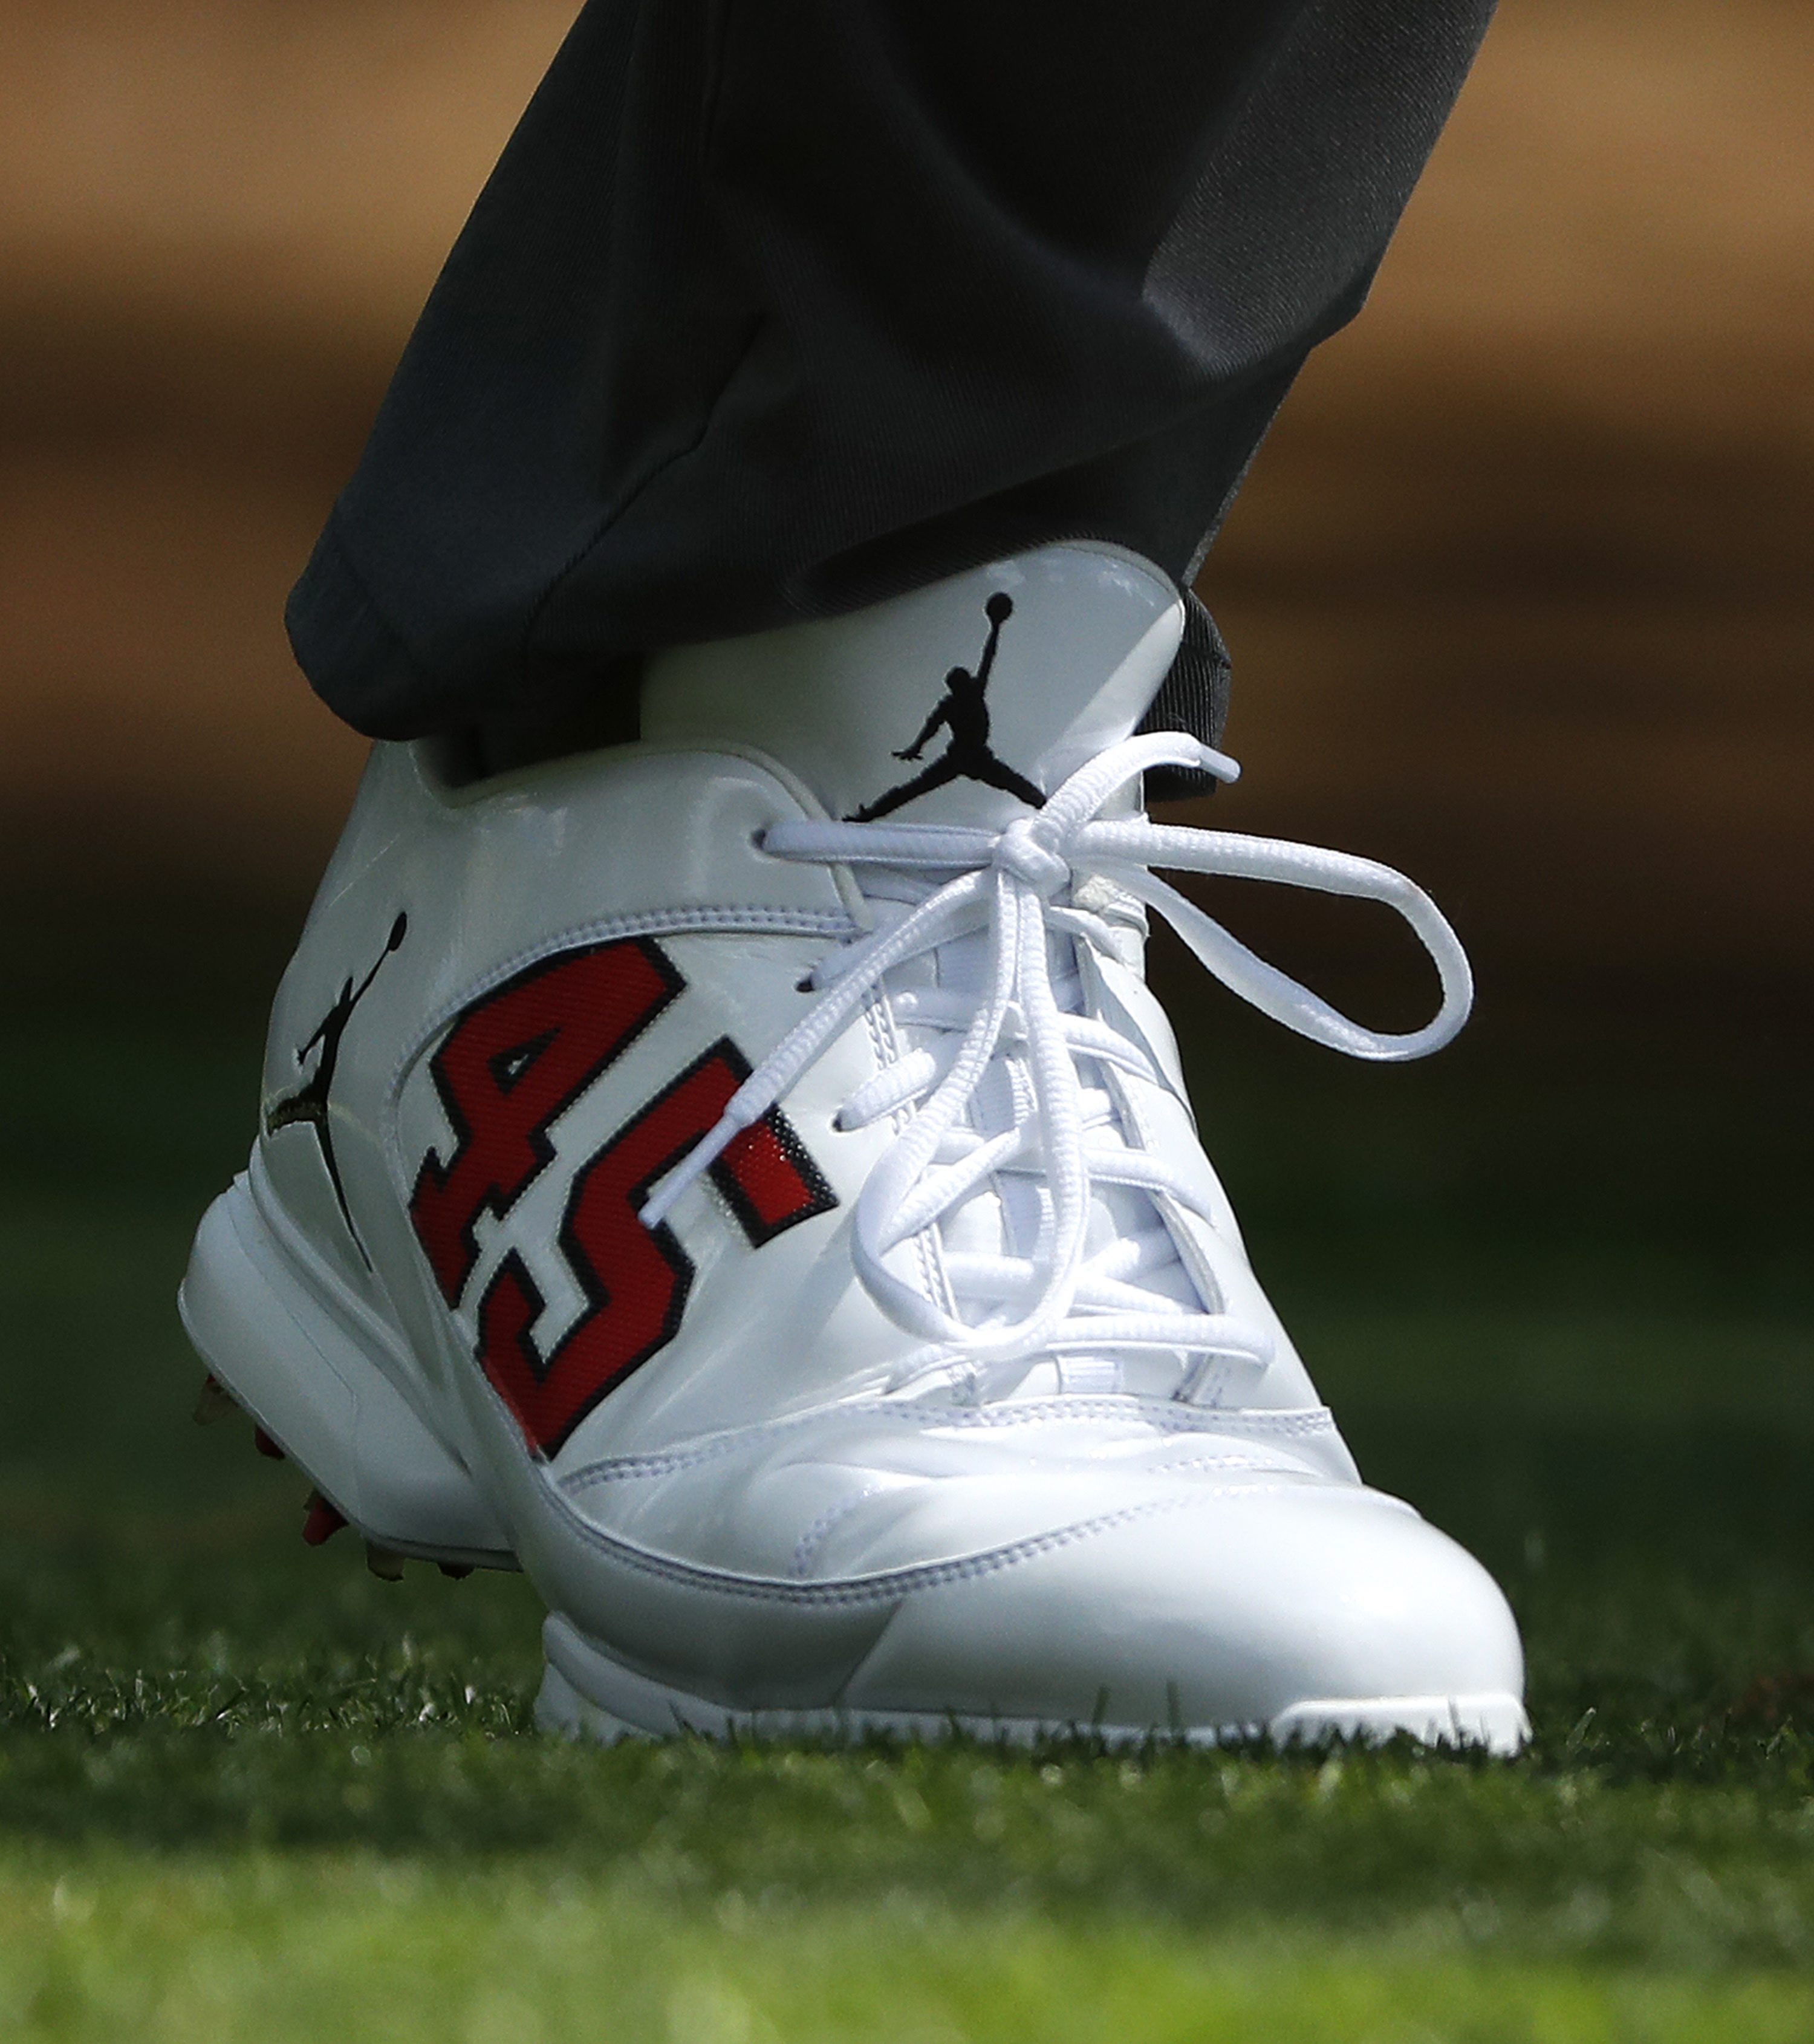 Keegan Bradley is rocking an awesome pair of Jordan golf shoes at the Masters For The Win